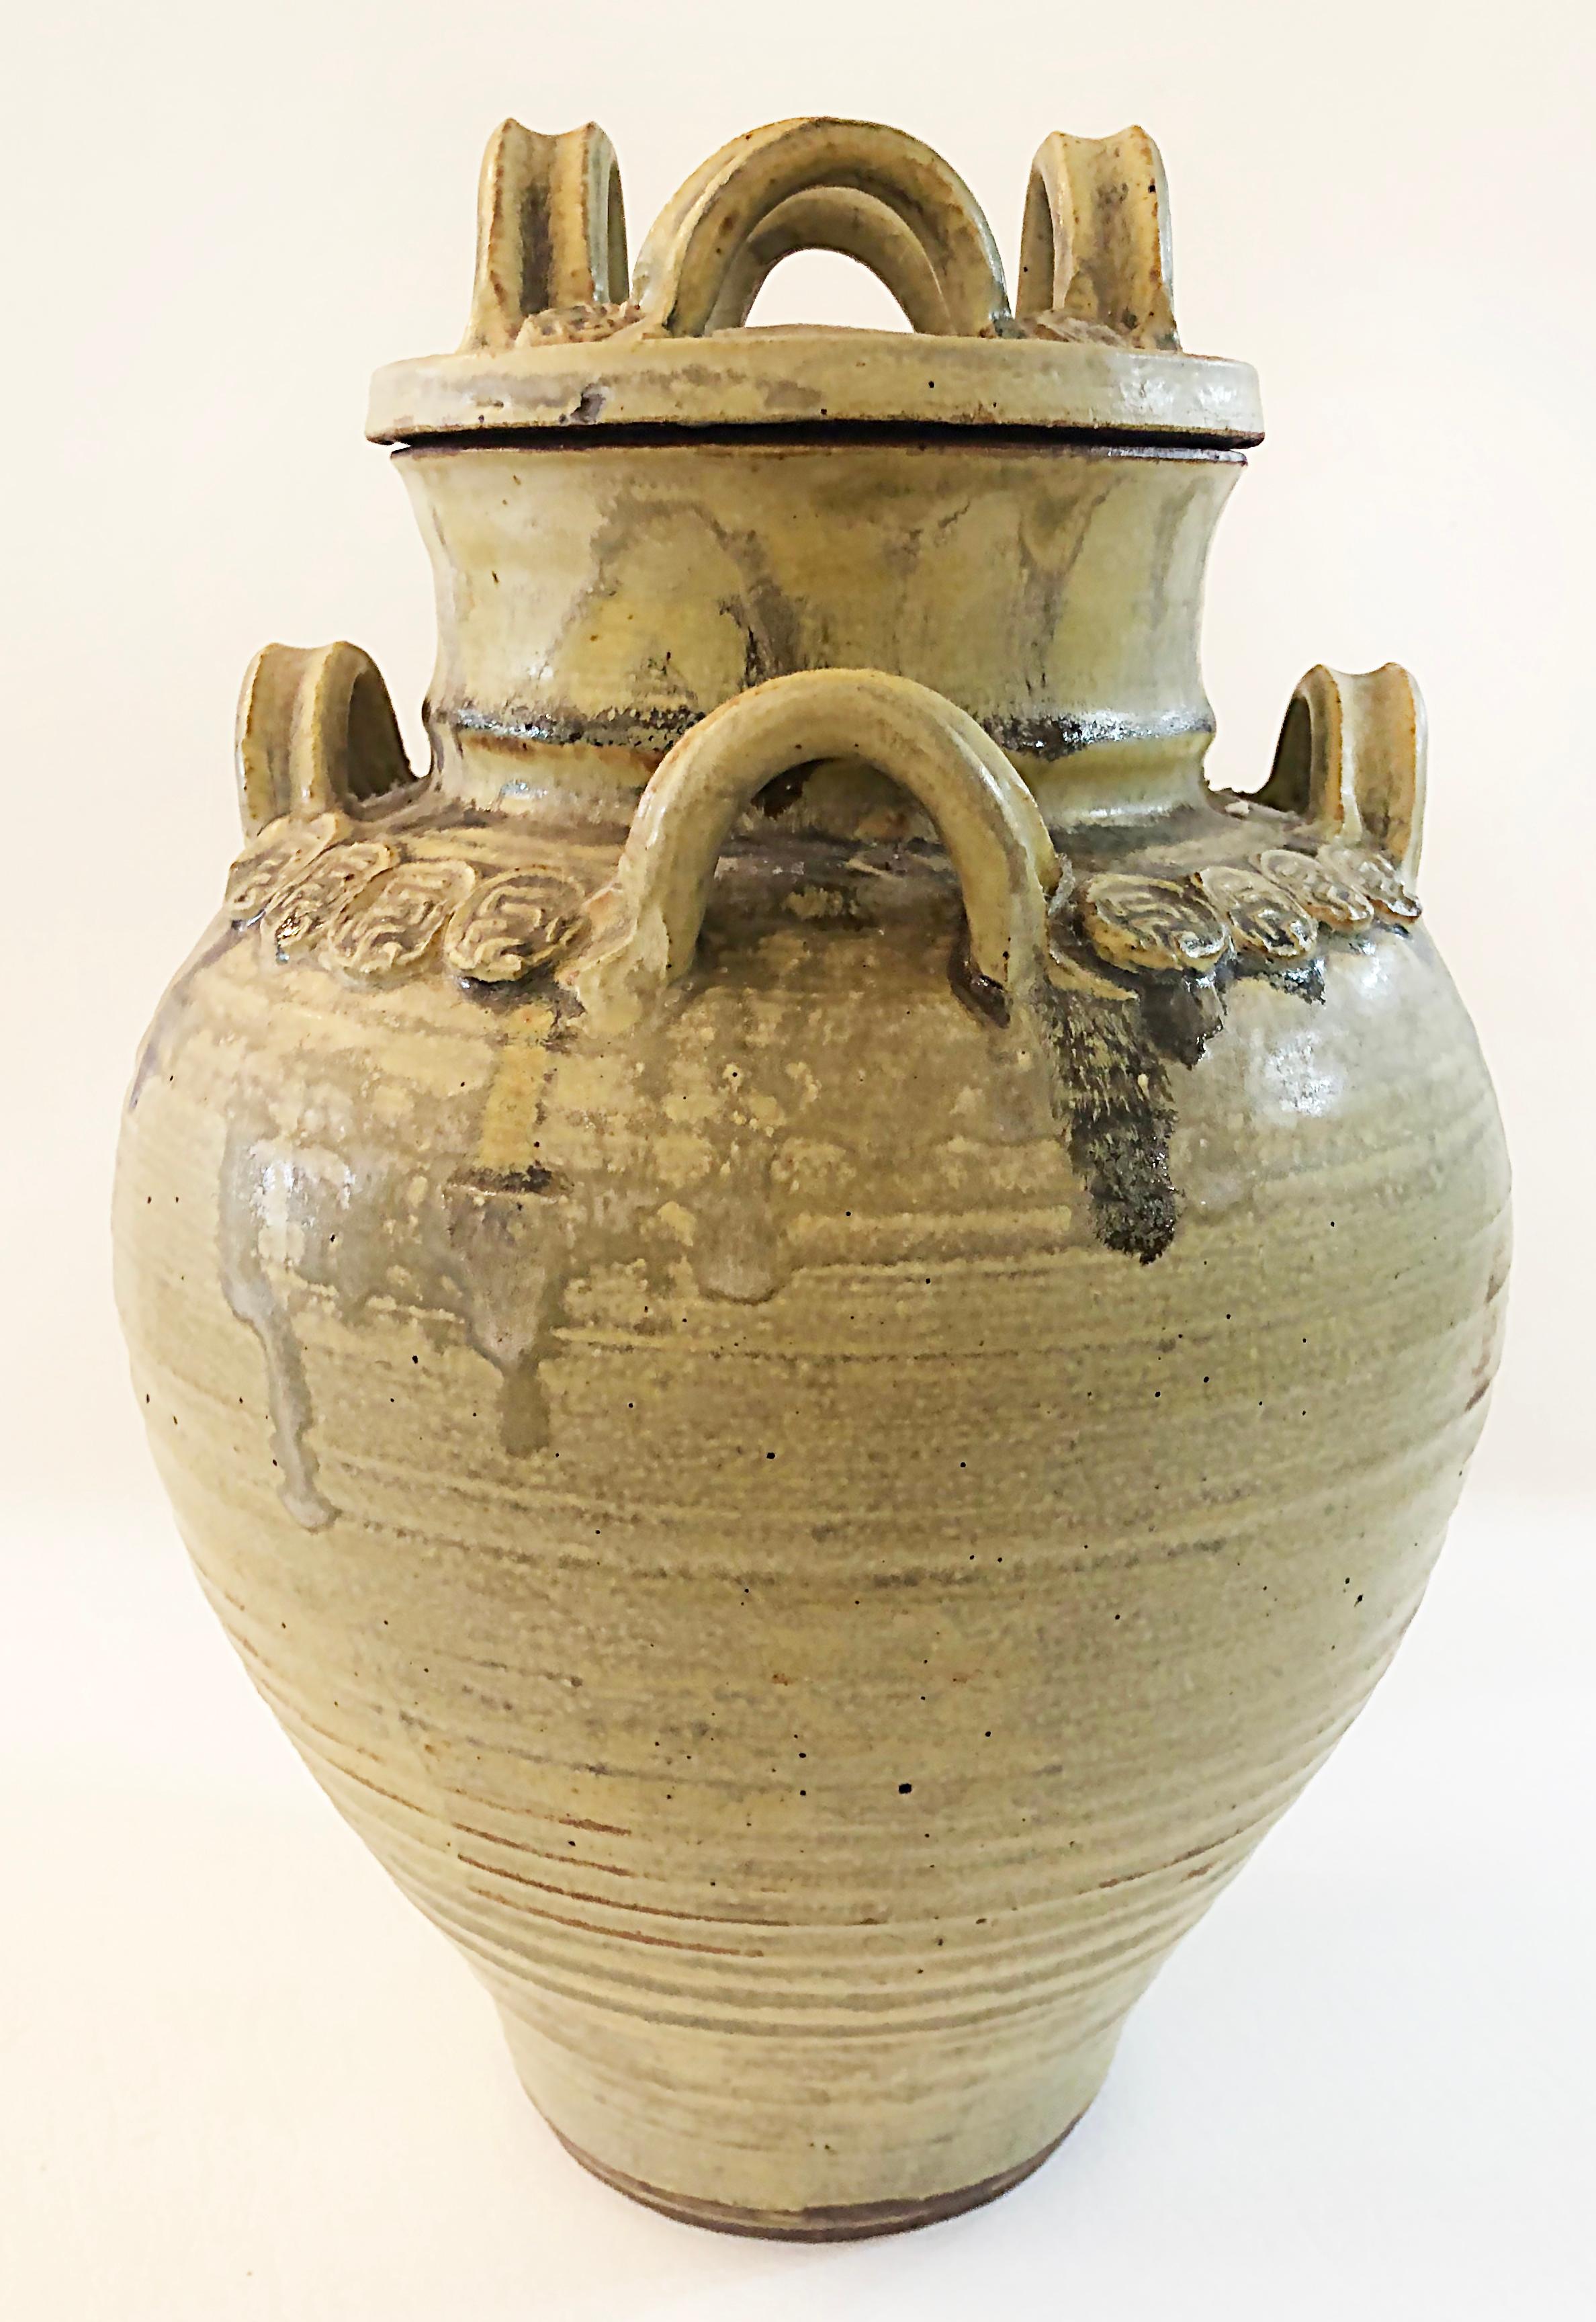 1975 Thrown and Built Studio Pottery Lidded Urn, Signed

Offered for sale is a hand-thrown and hand-built glazed studio pottery urn featuring four handles on the shoulders and the lid. The urn is signed and dated '75 on the underside. 

DIMENSIONS: